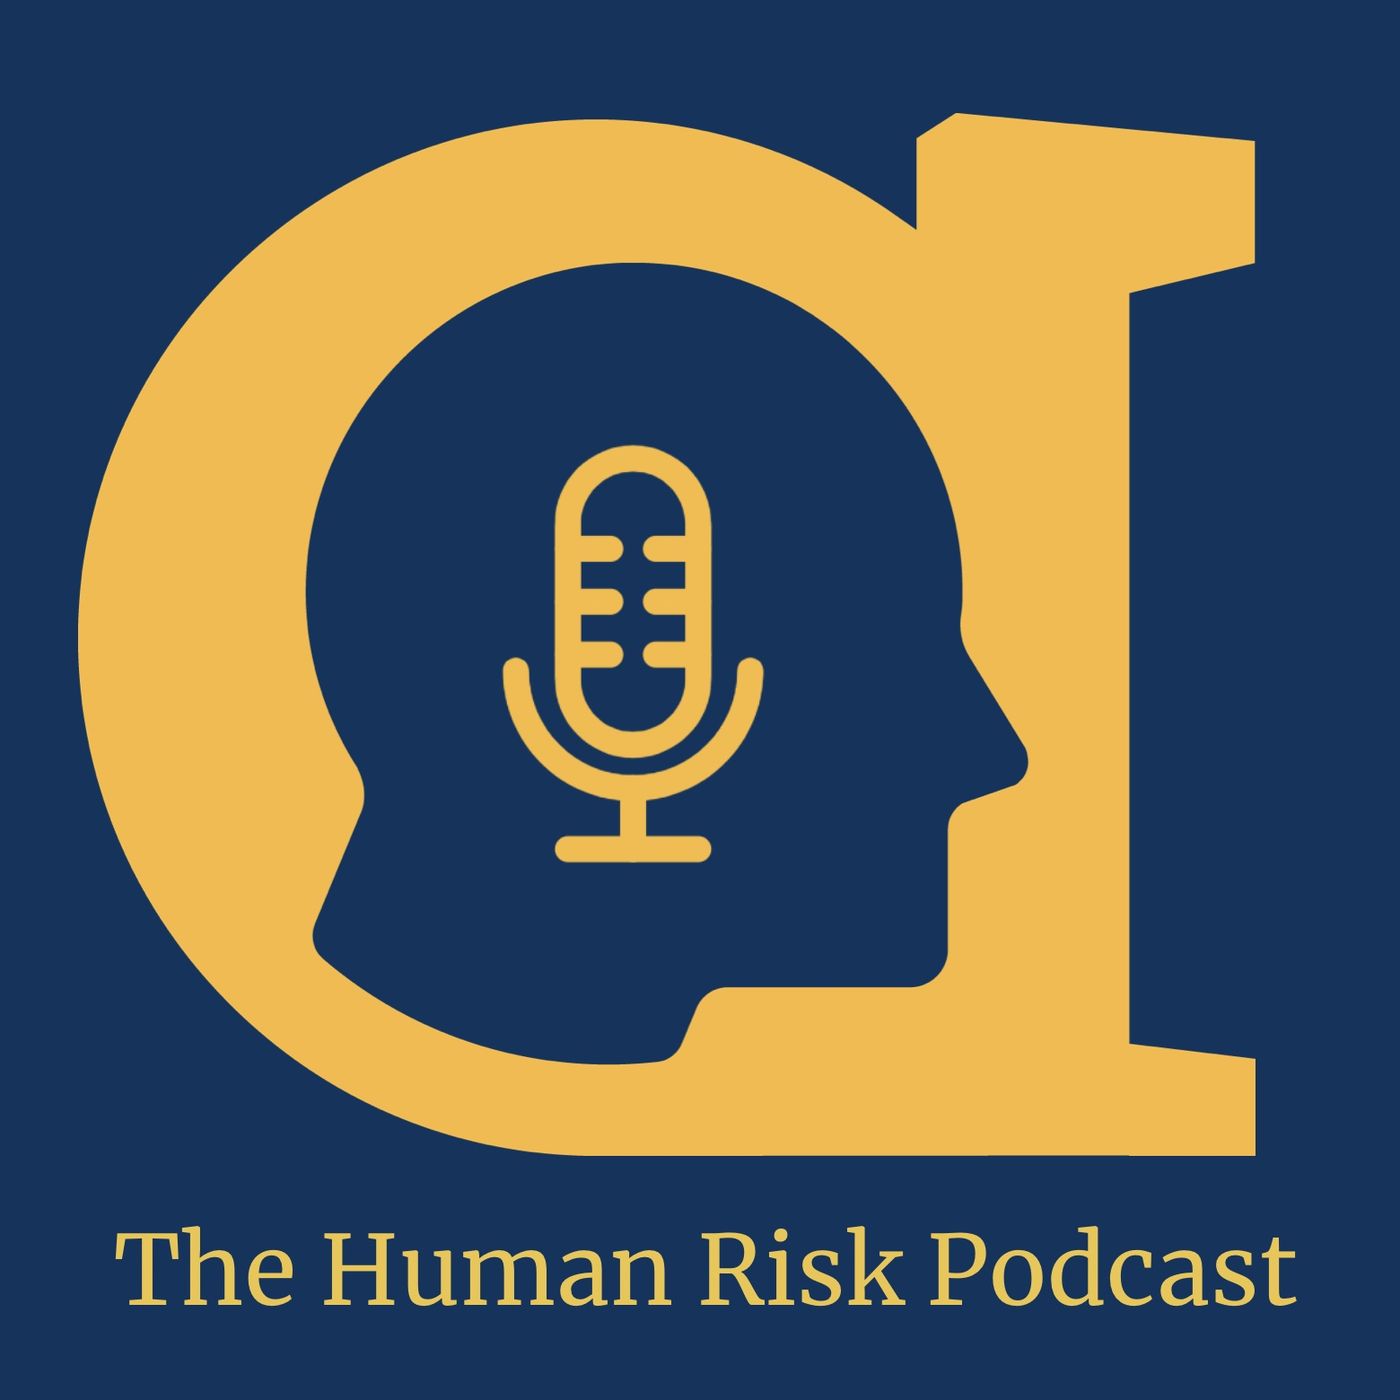 Human Risk Webinar Recording: The Ethics of Events during a Pandemic